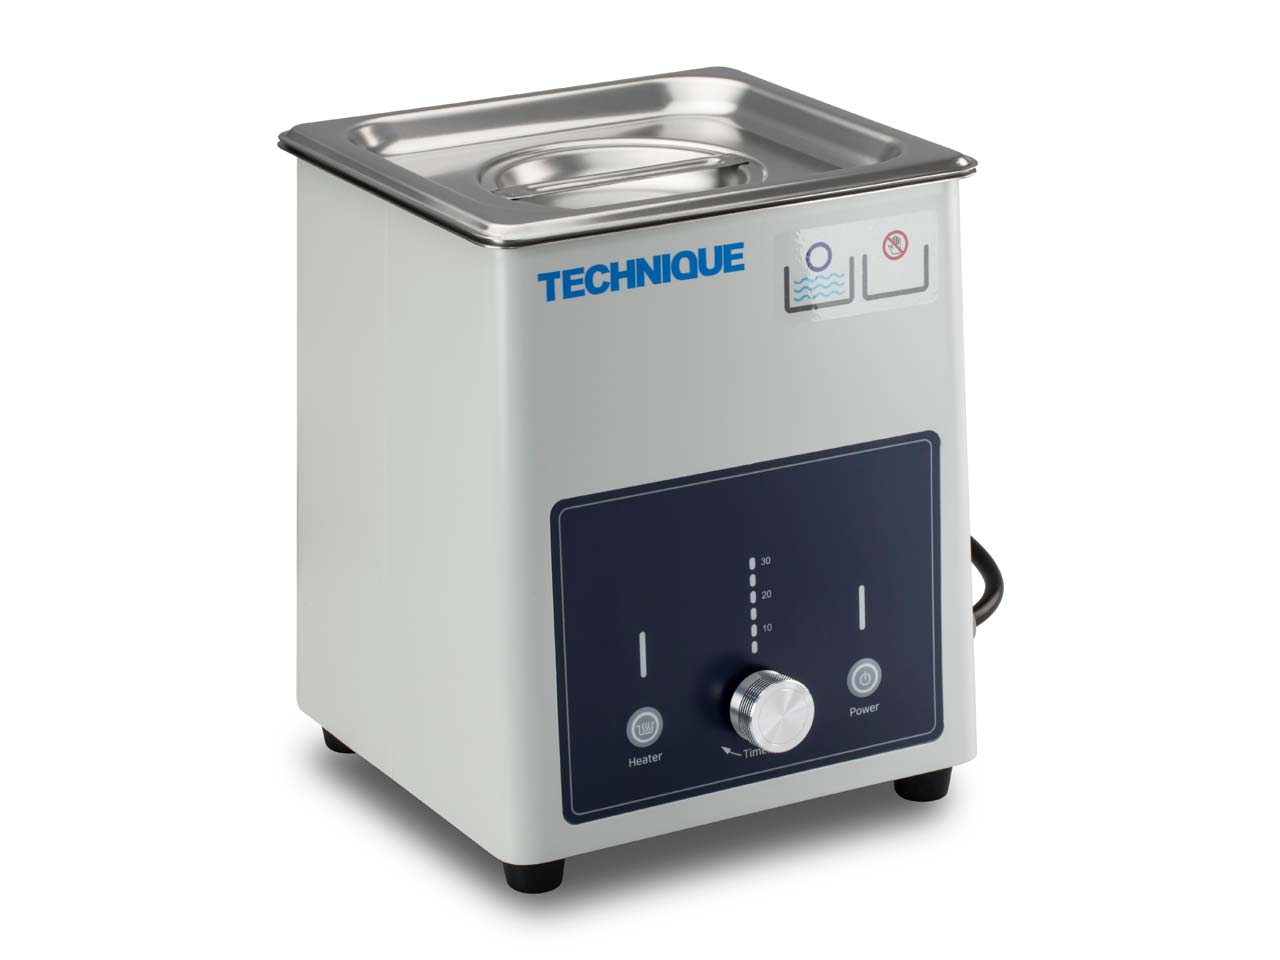 Technique Ultrasonic 1.8 Litre Stainless Steel, New Model Questions & Answers